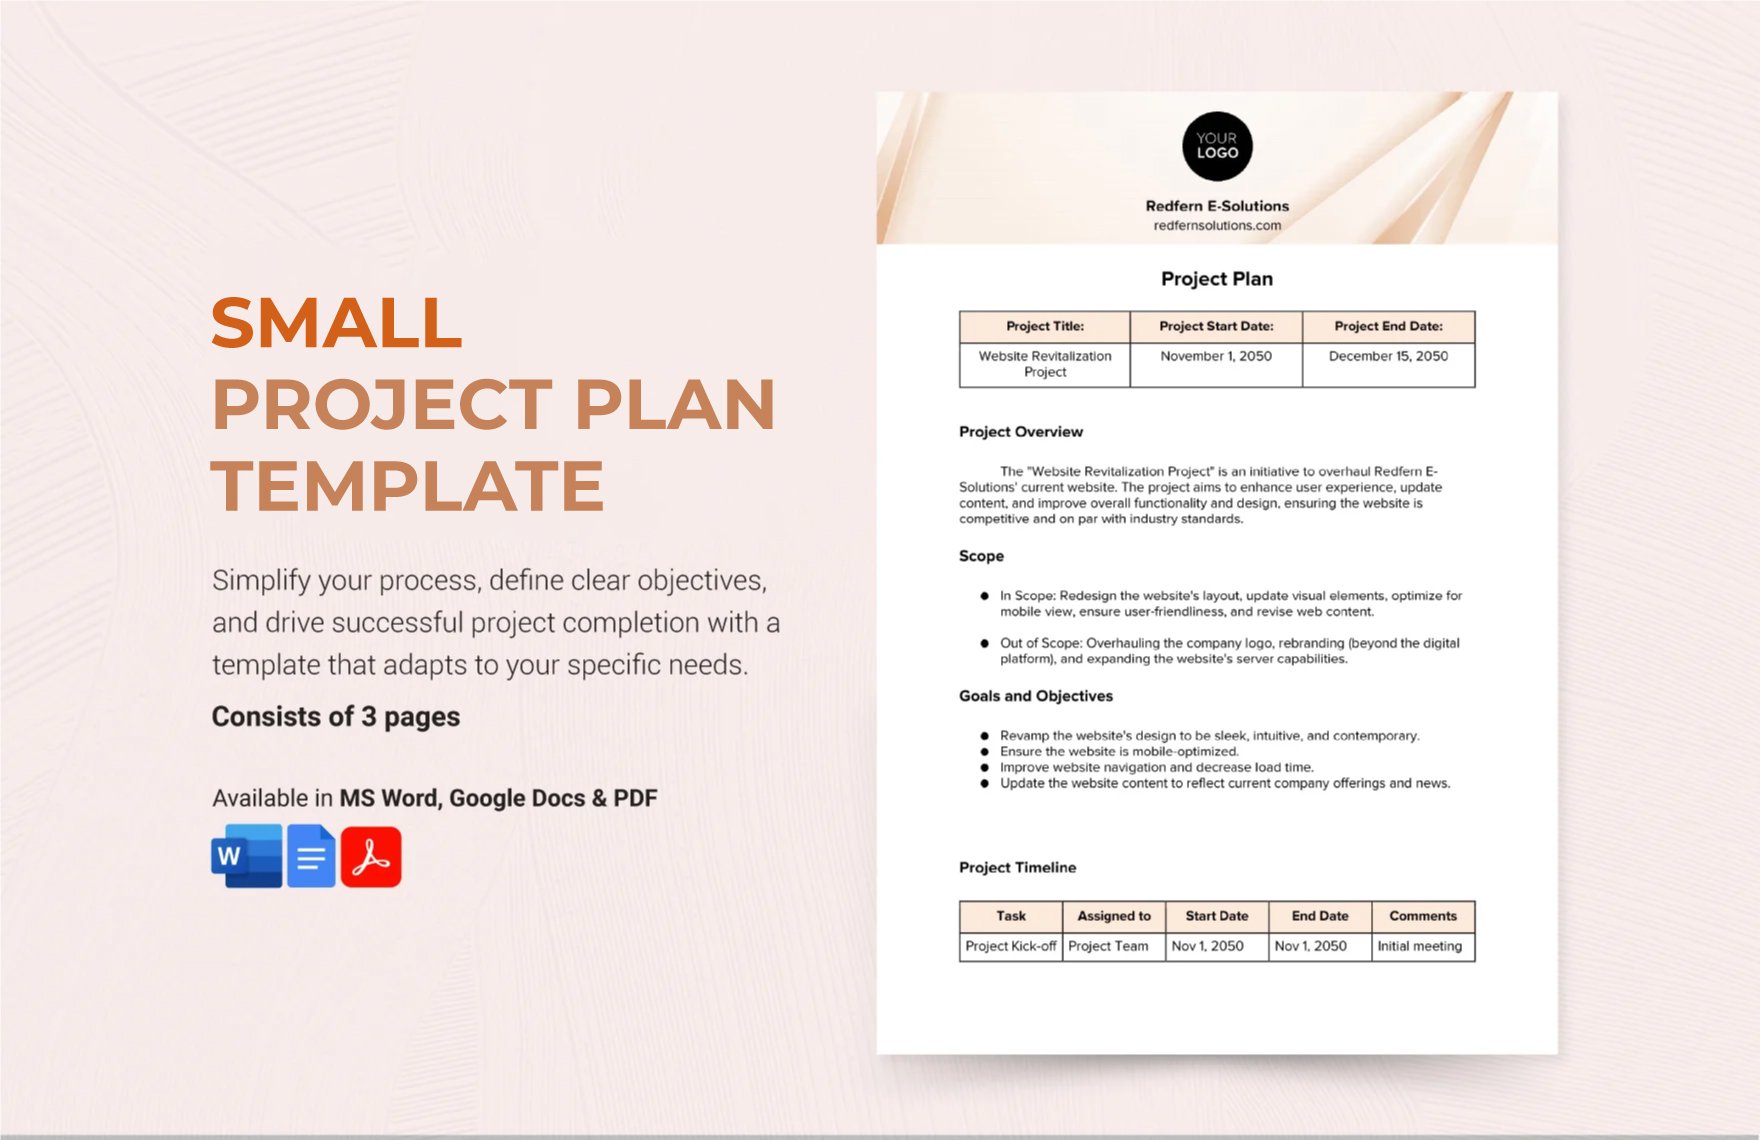 Free Small Project Plan Template in Word, Google Docs, PDF